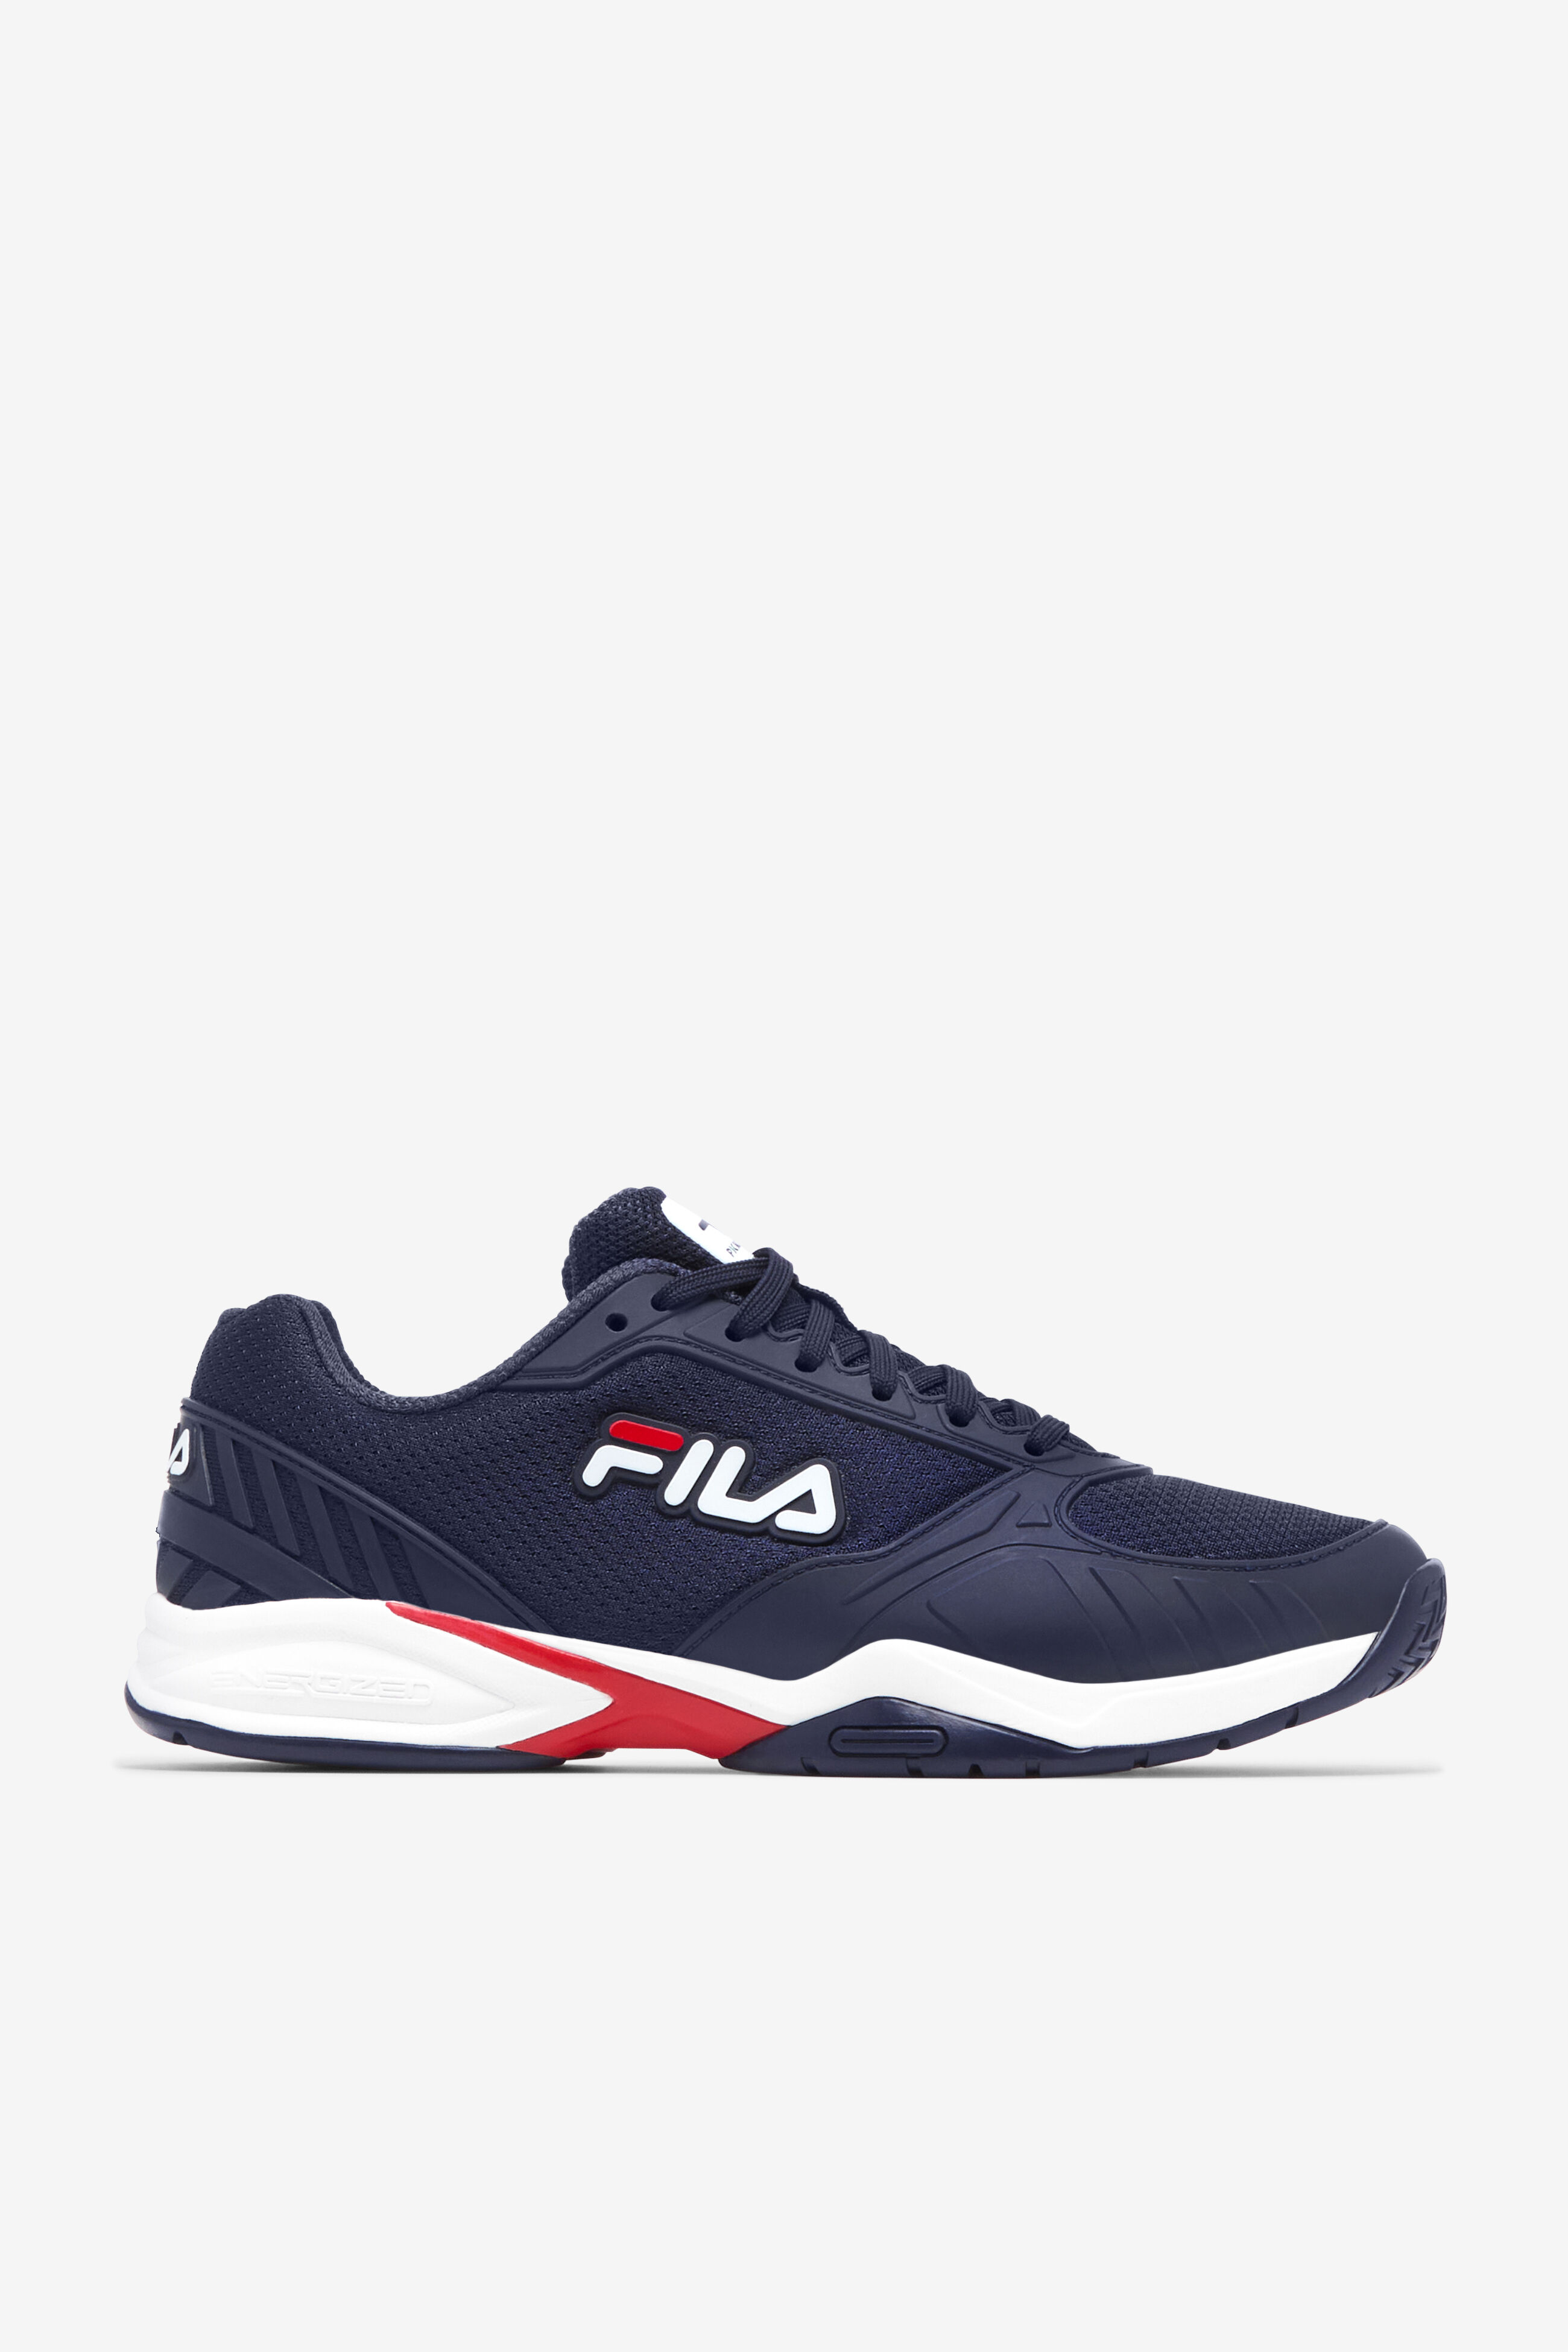 Volley Zone Men's Pickleball Court Shoes | Fila 723567674087